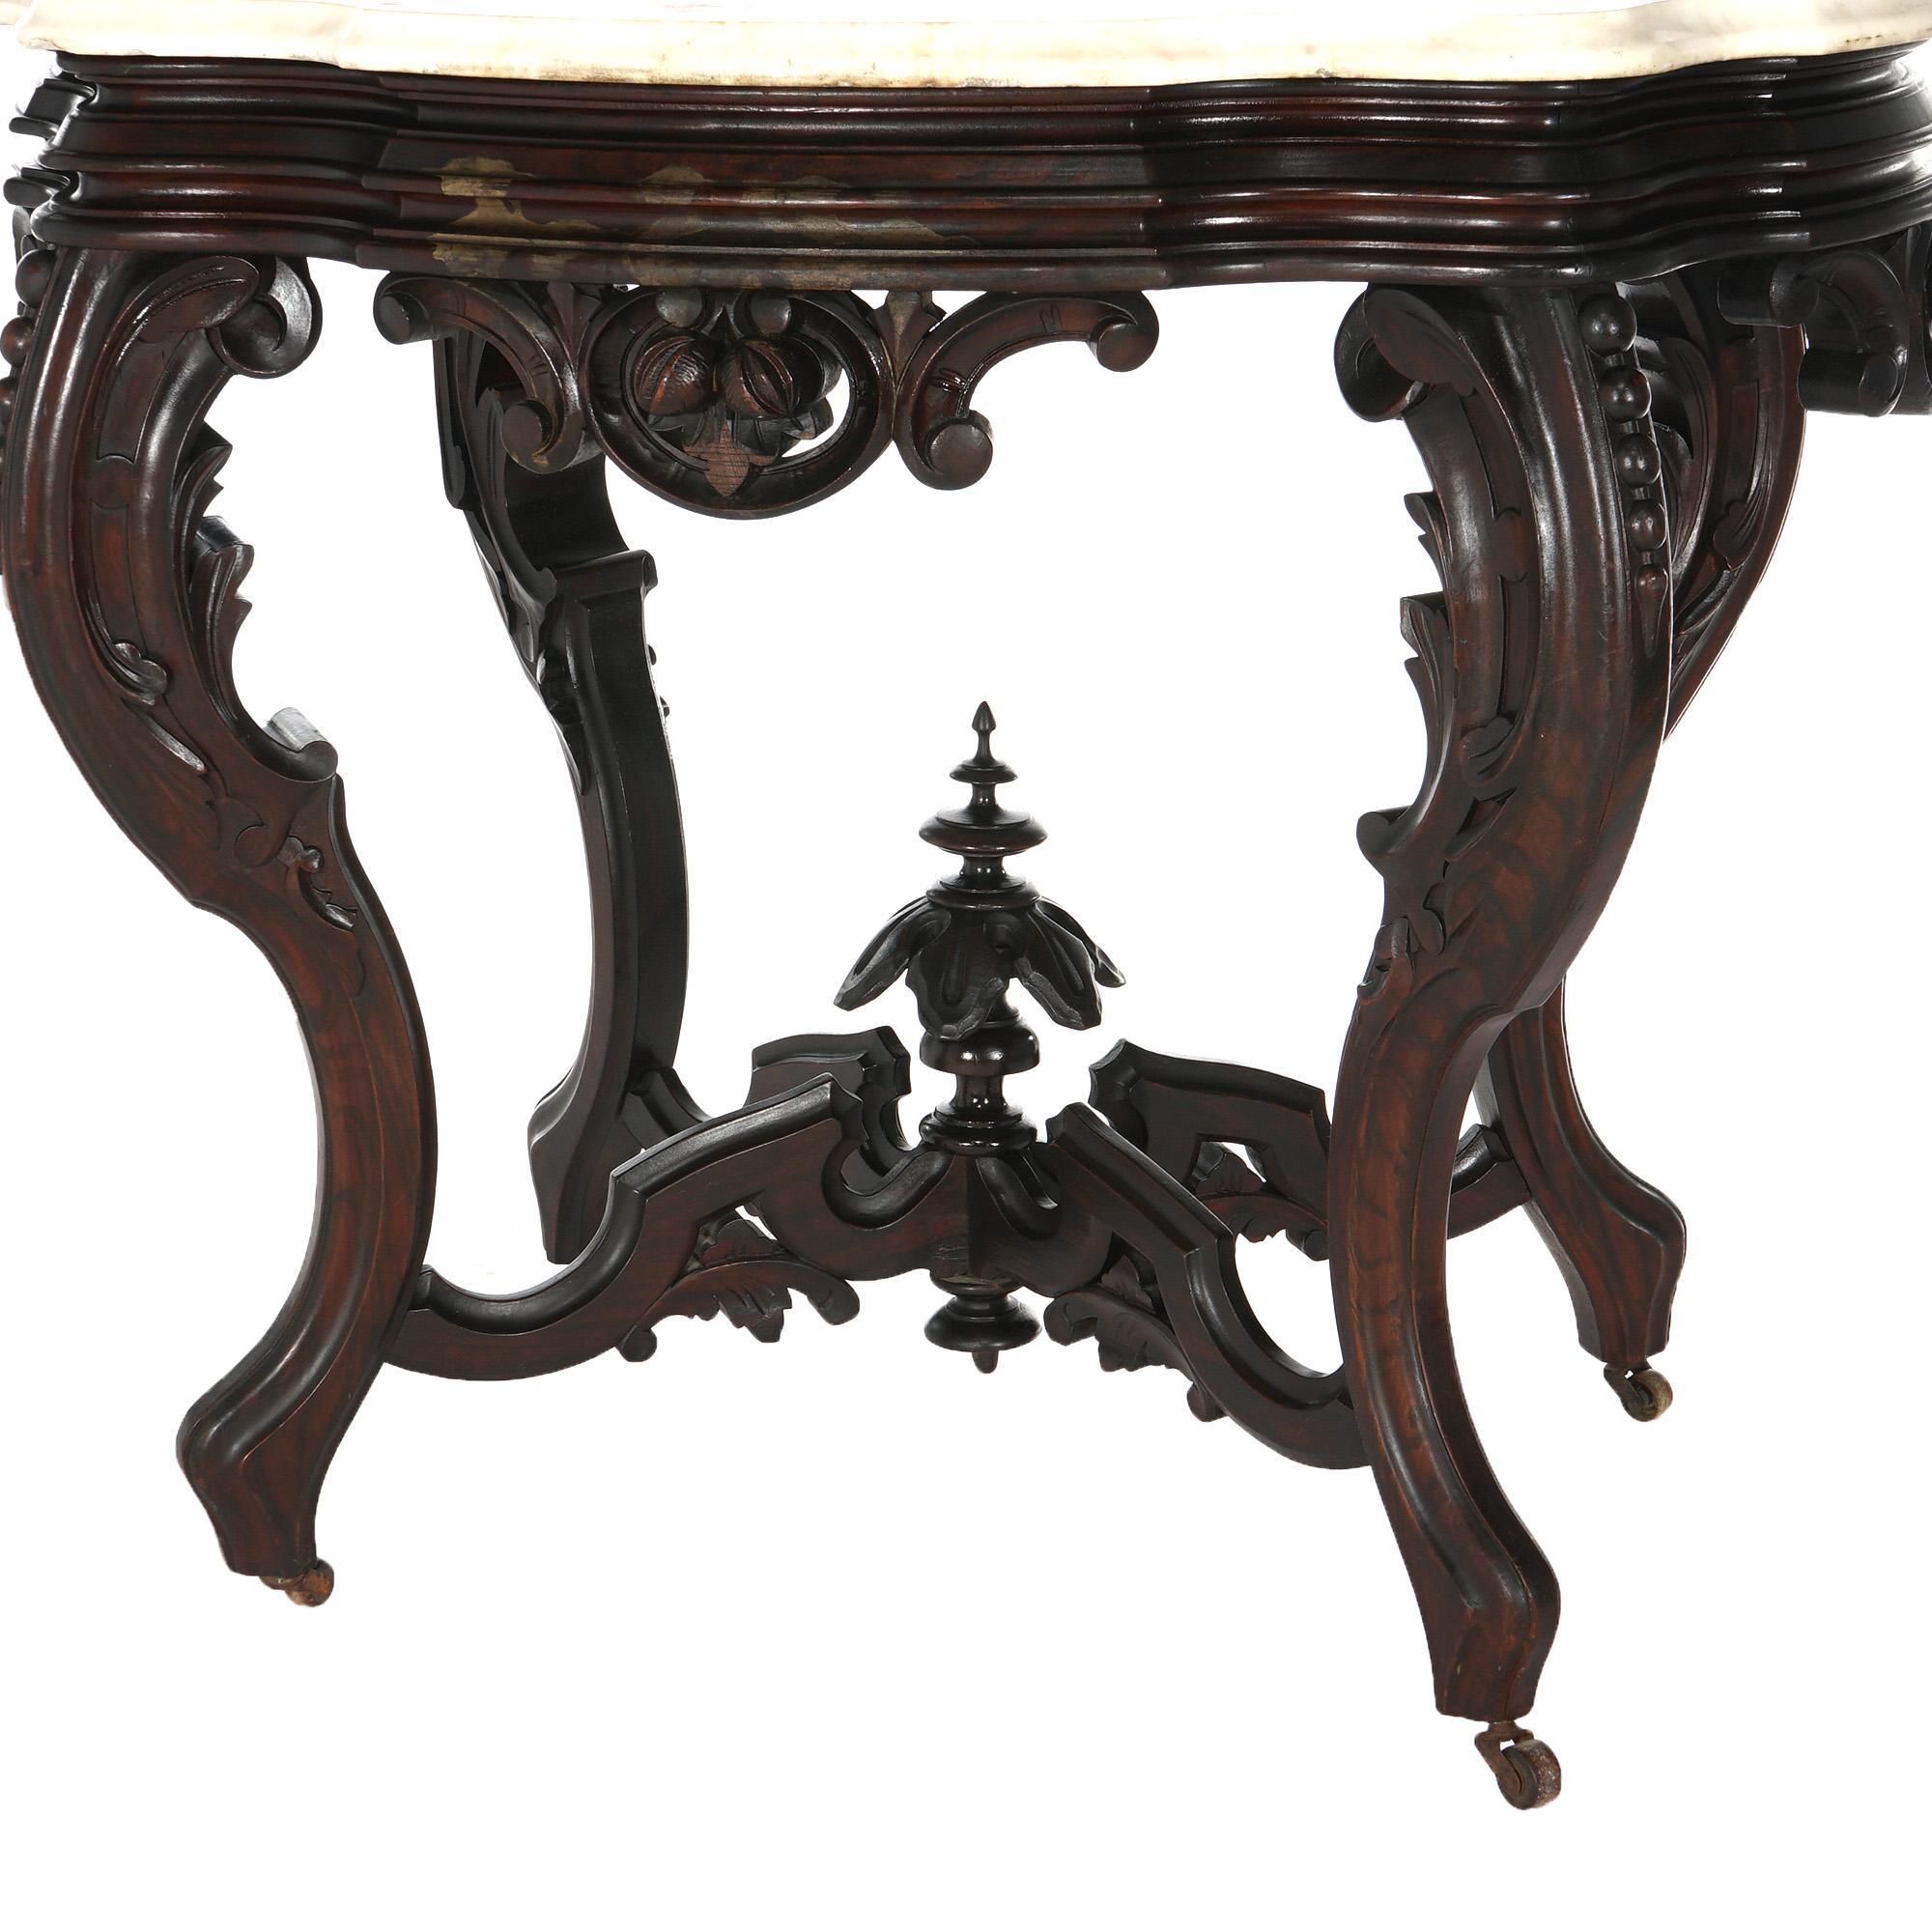 Renaissance Revival Antique Brooks Victorian Heavily Carved Walnut & Marble Turtle Top Table C1870 For Sale